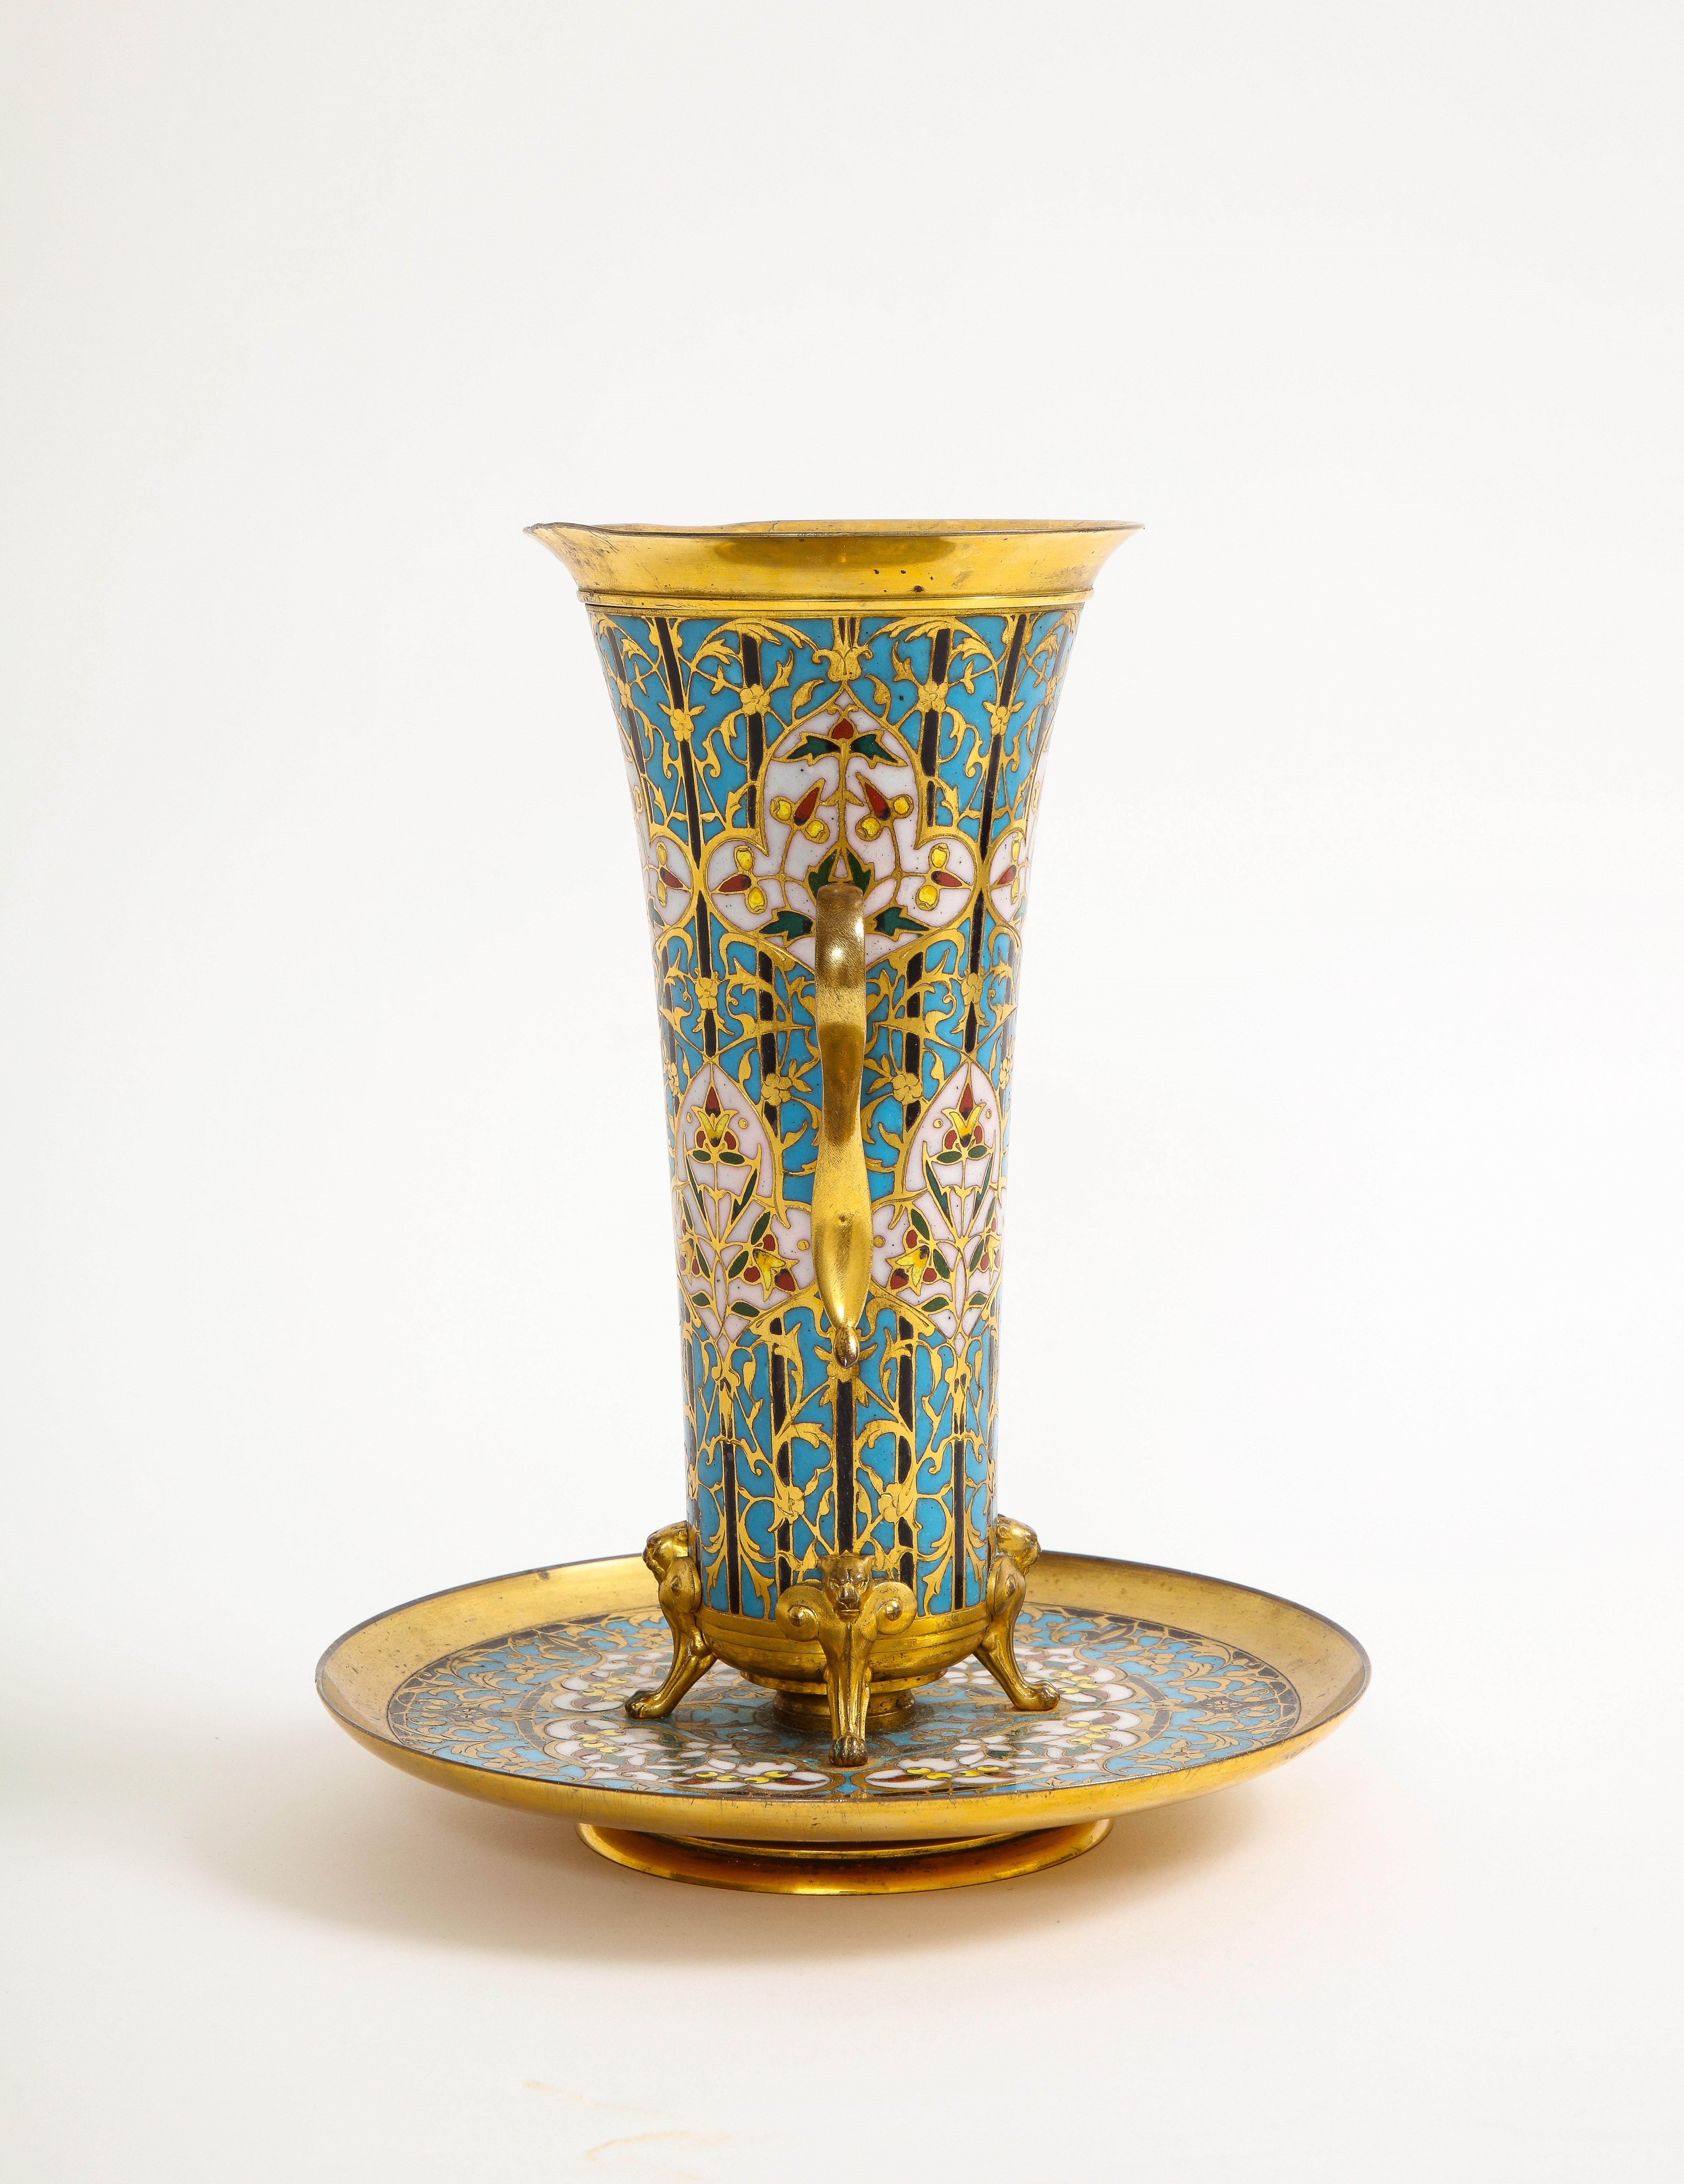 19th C. French Islamic Champleve Enamel Vase and Underplate, Signed Barbedienne In Good Condition For Sale In New York, NY